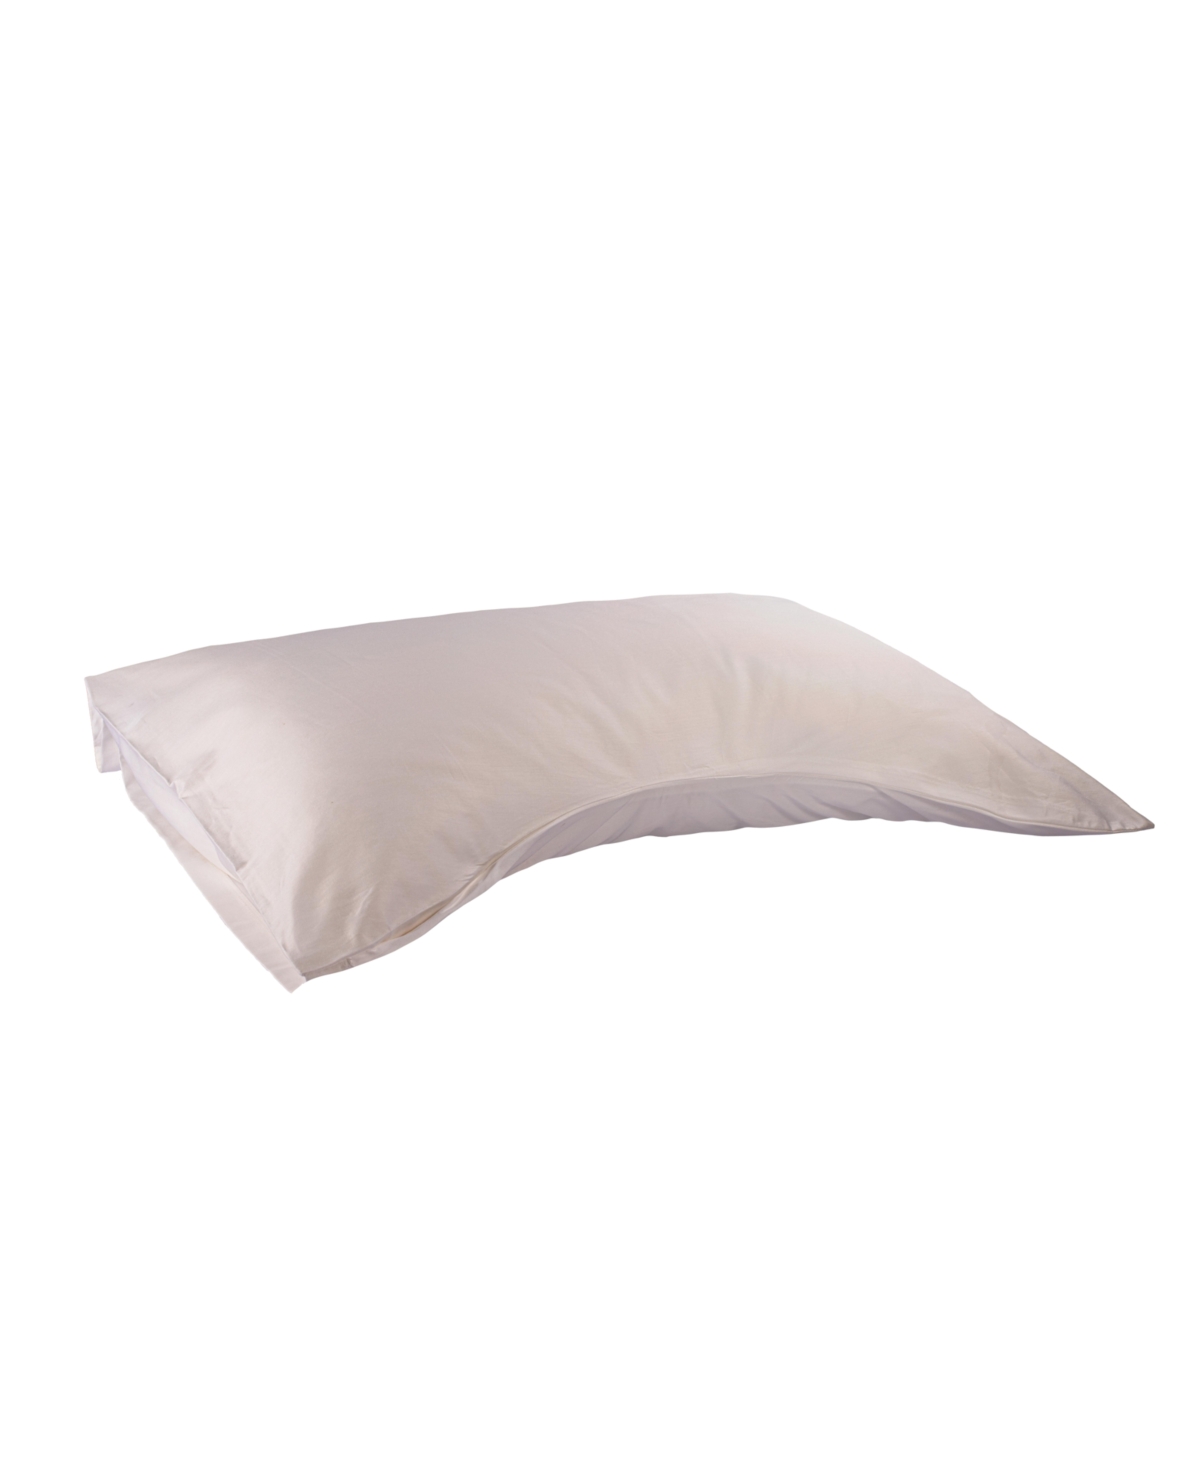 Sleep & Beyond Natural Latex And Wool Pillow, Side Sleeper, Standard In Off-white